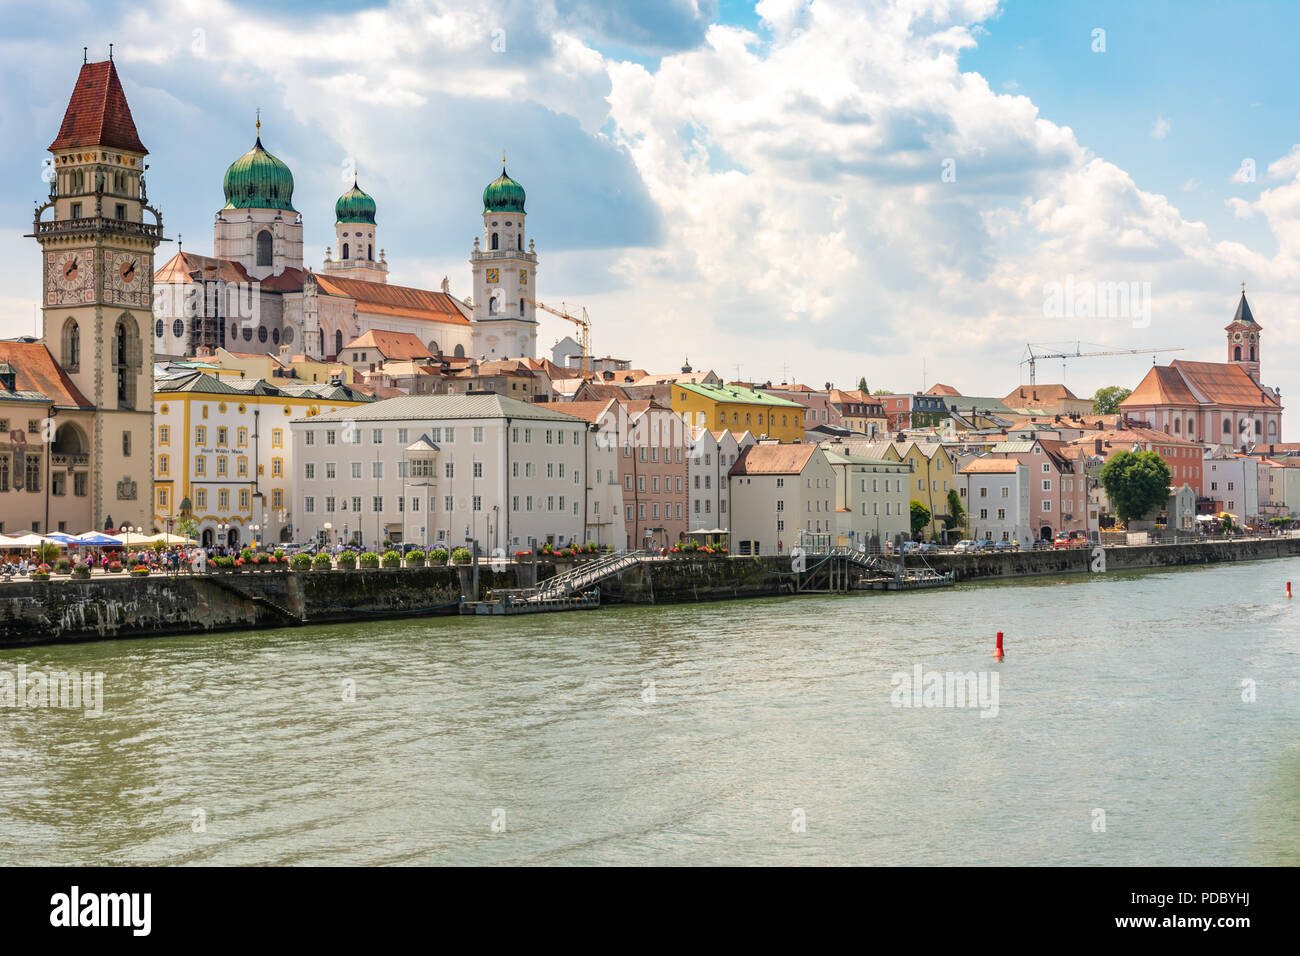 PASSAU, GERMANY - JULY 14: Waterfront of the Danube river in Passau, Germany on July 14, 2018. Foto taken from Prinzregent-Luitpold bridge with view t Stock Photo